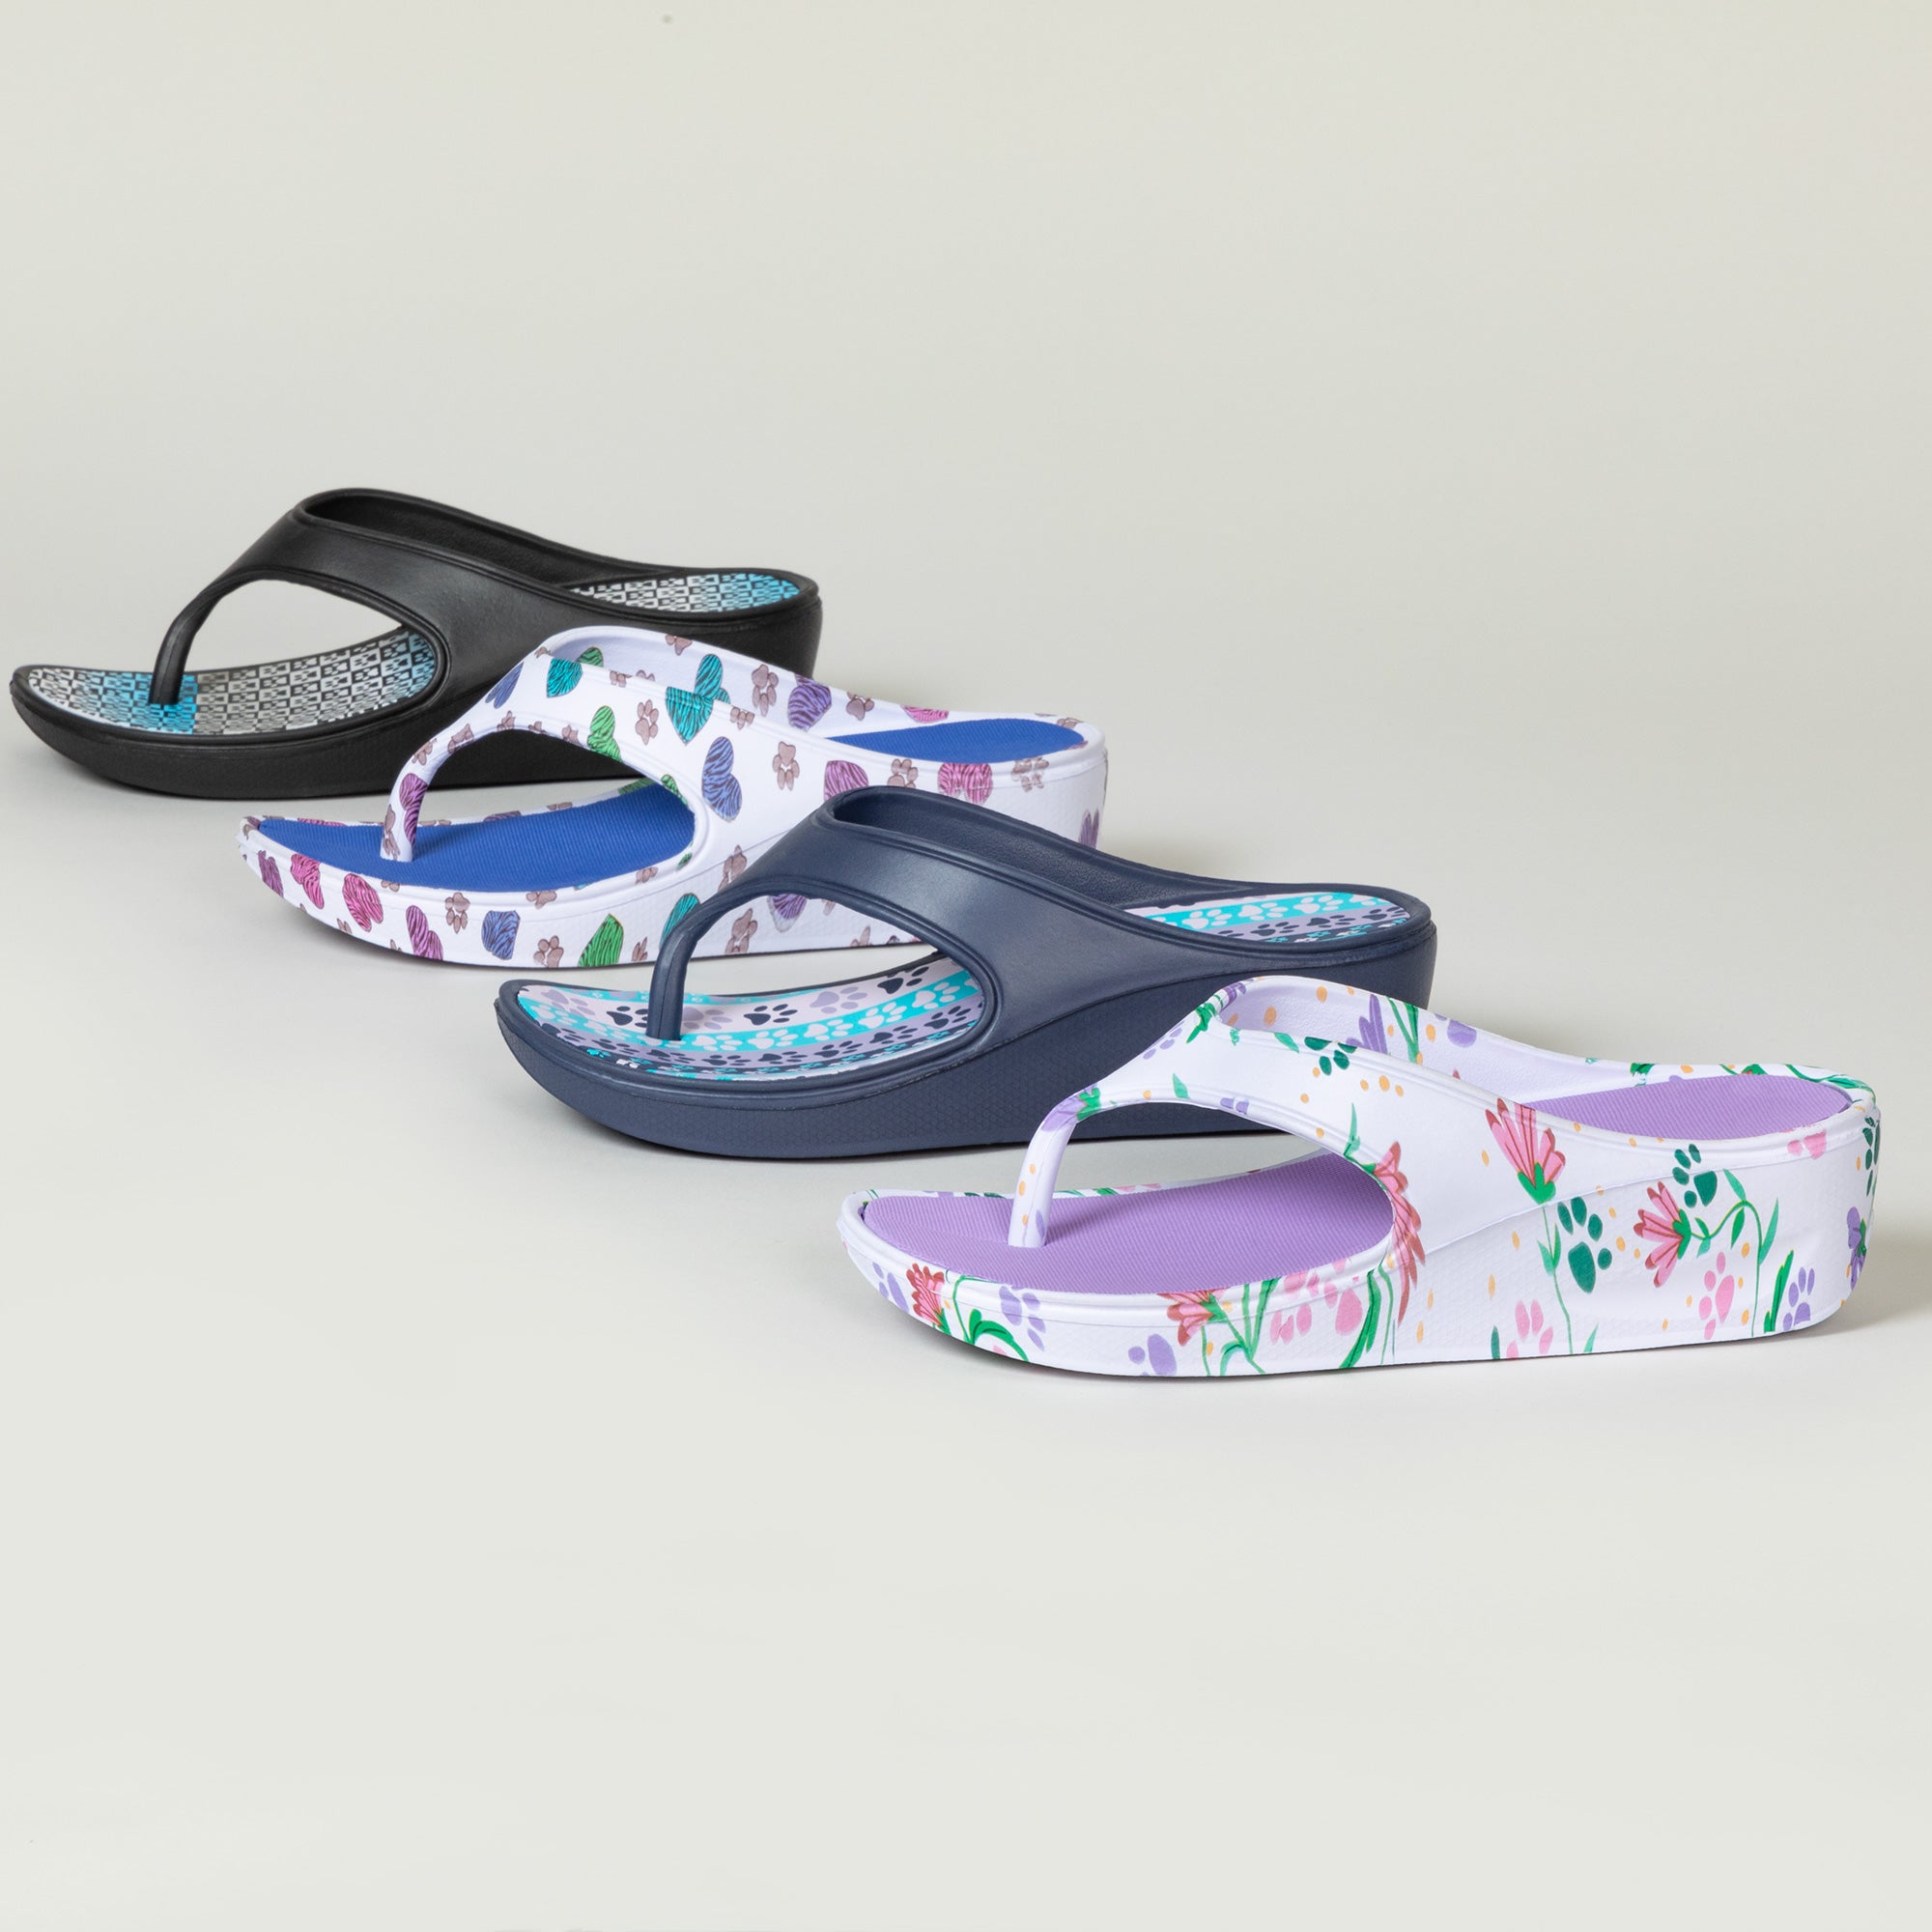 Paw Print Wedge Flip Flops - Paws & Hearts - 9